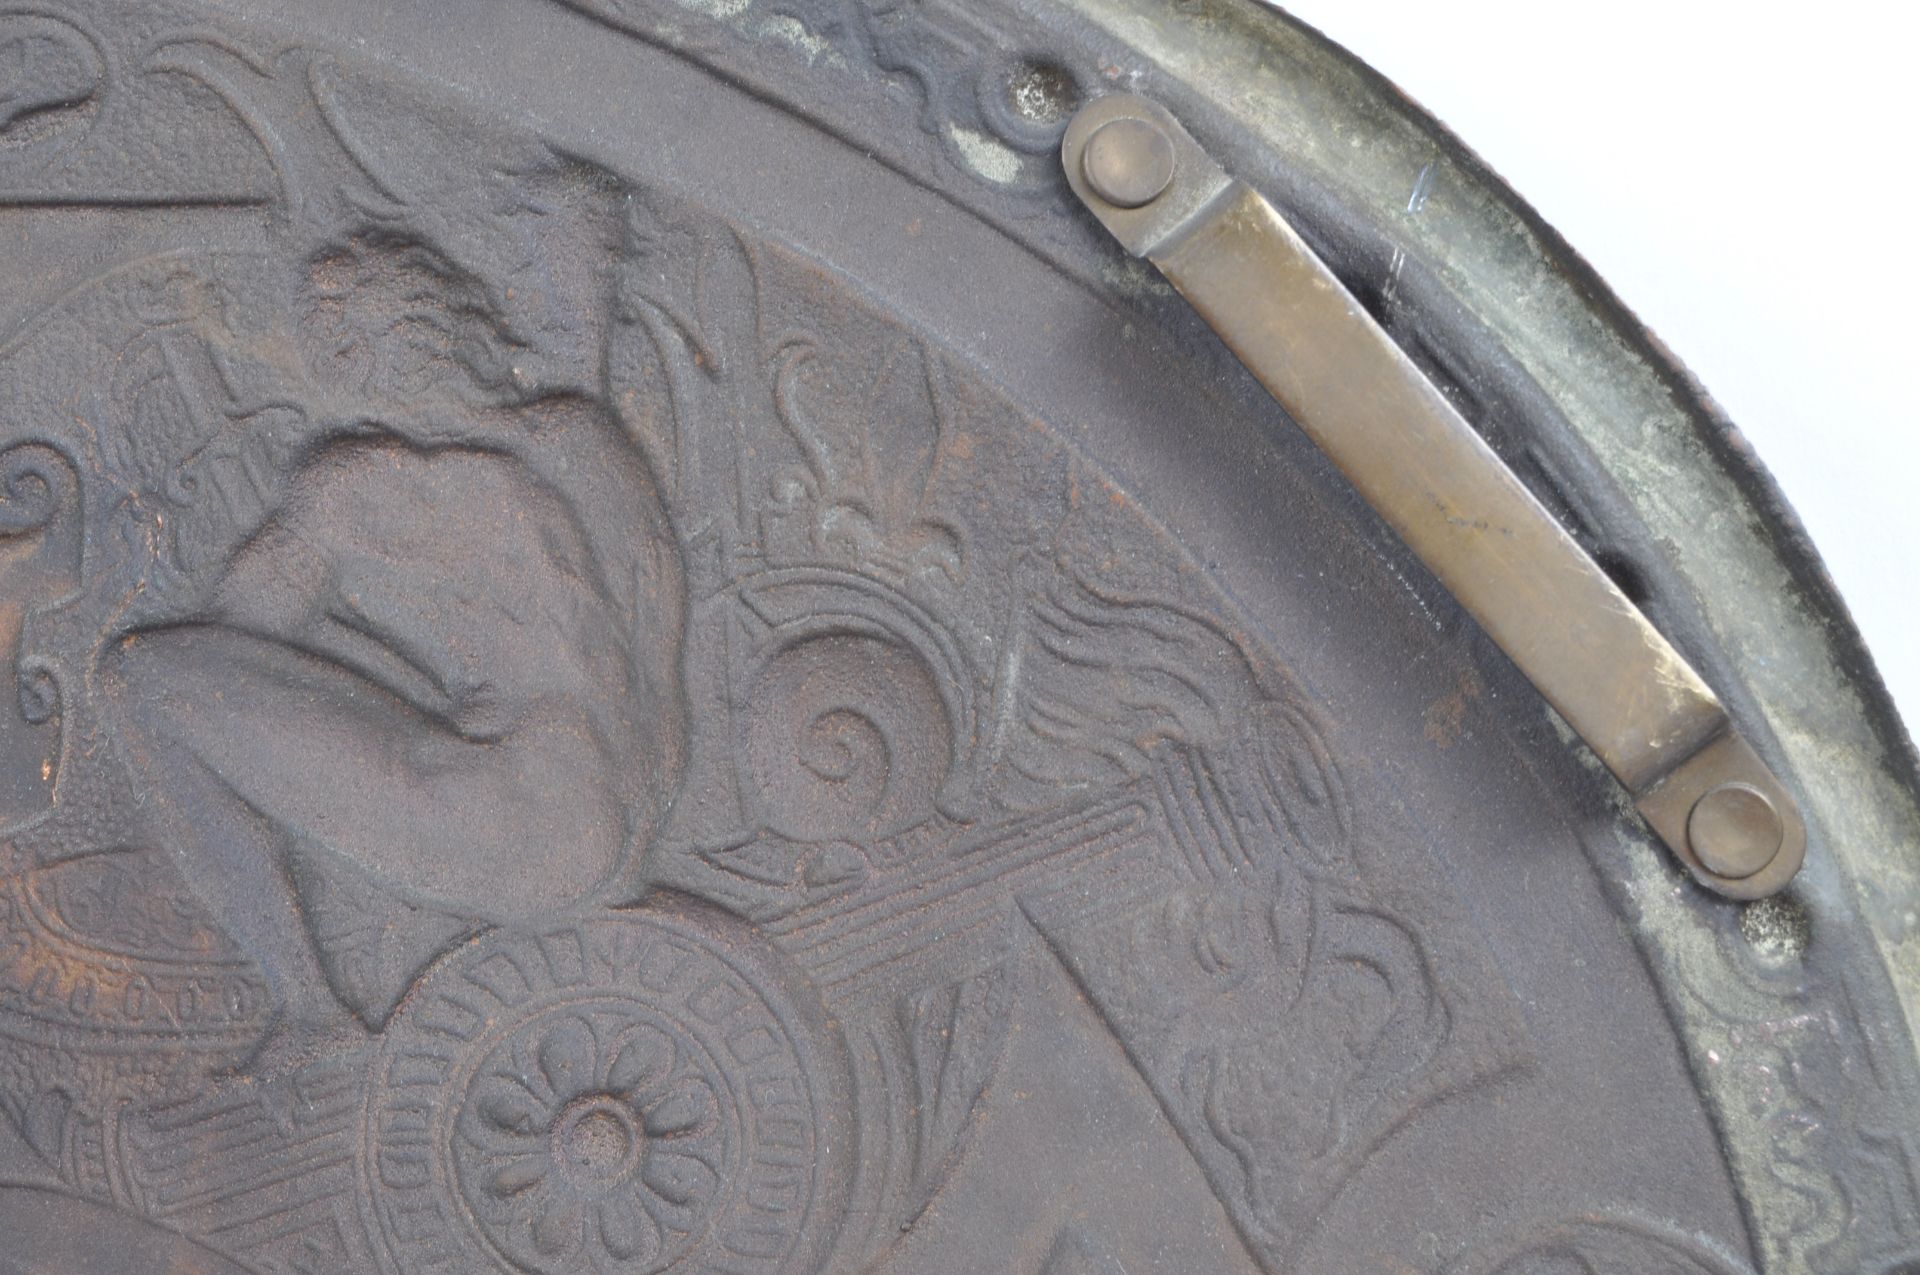 19TH CENTURY DECORATIVE COPPER SHIELD RELATING TO HENRY II - Image 7 of 8